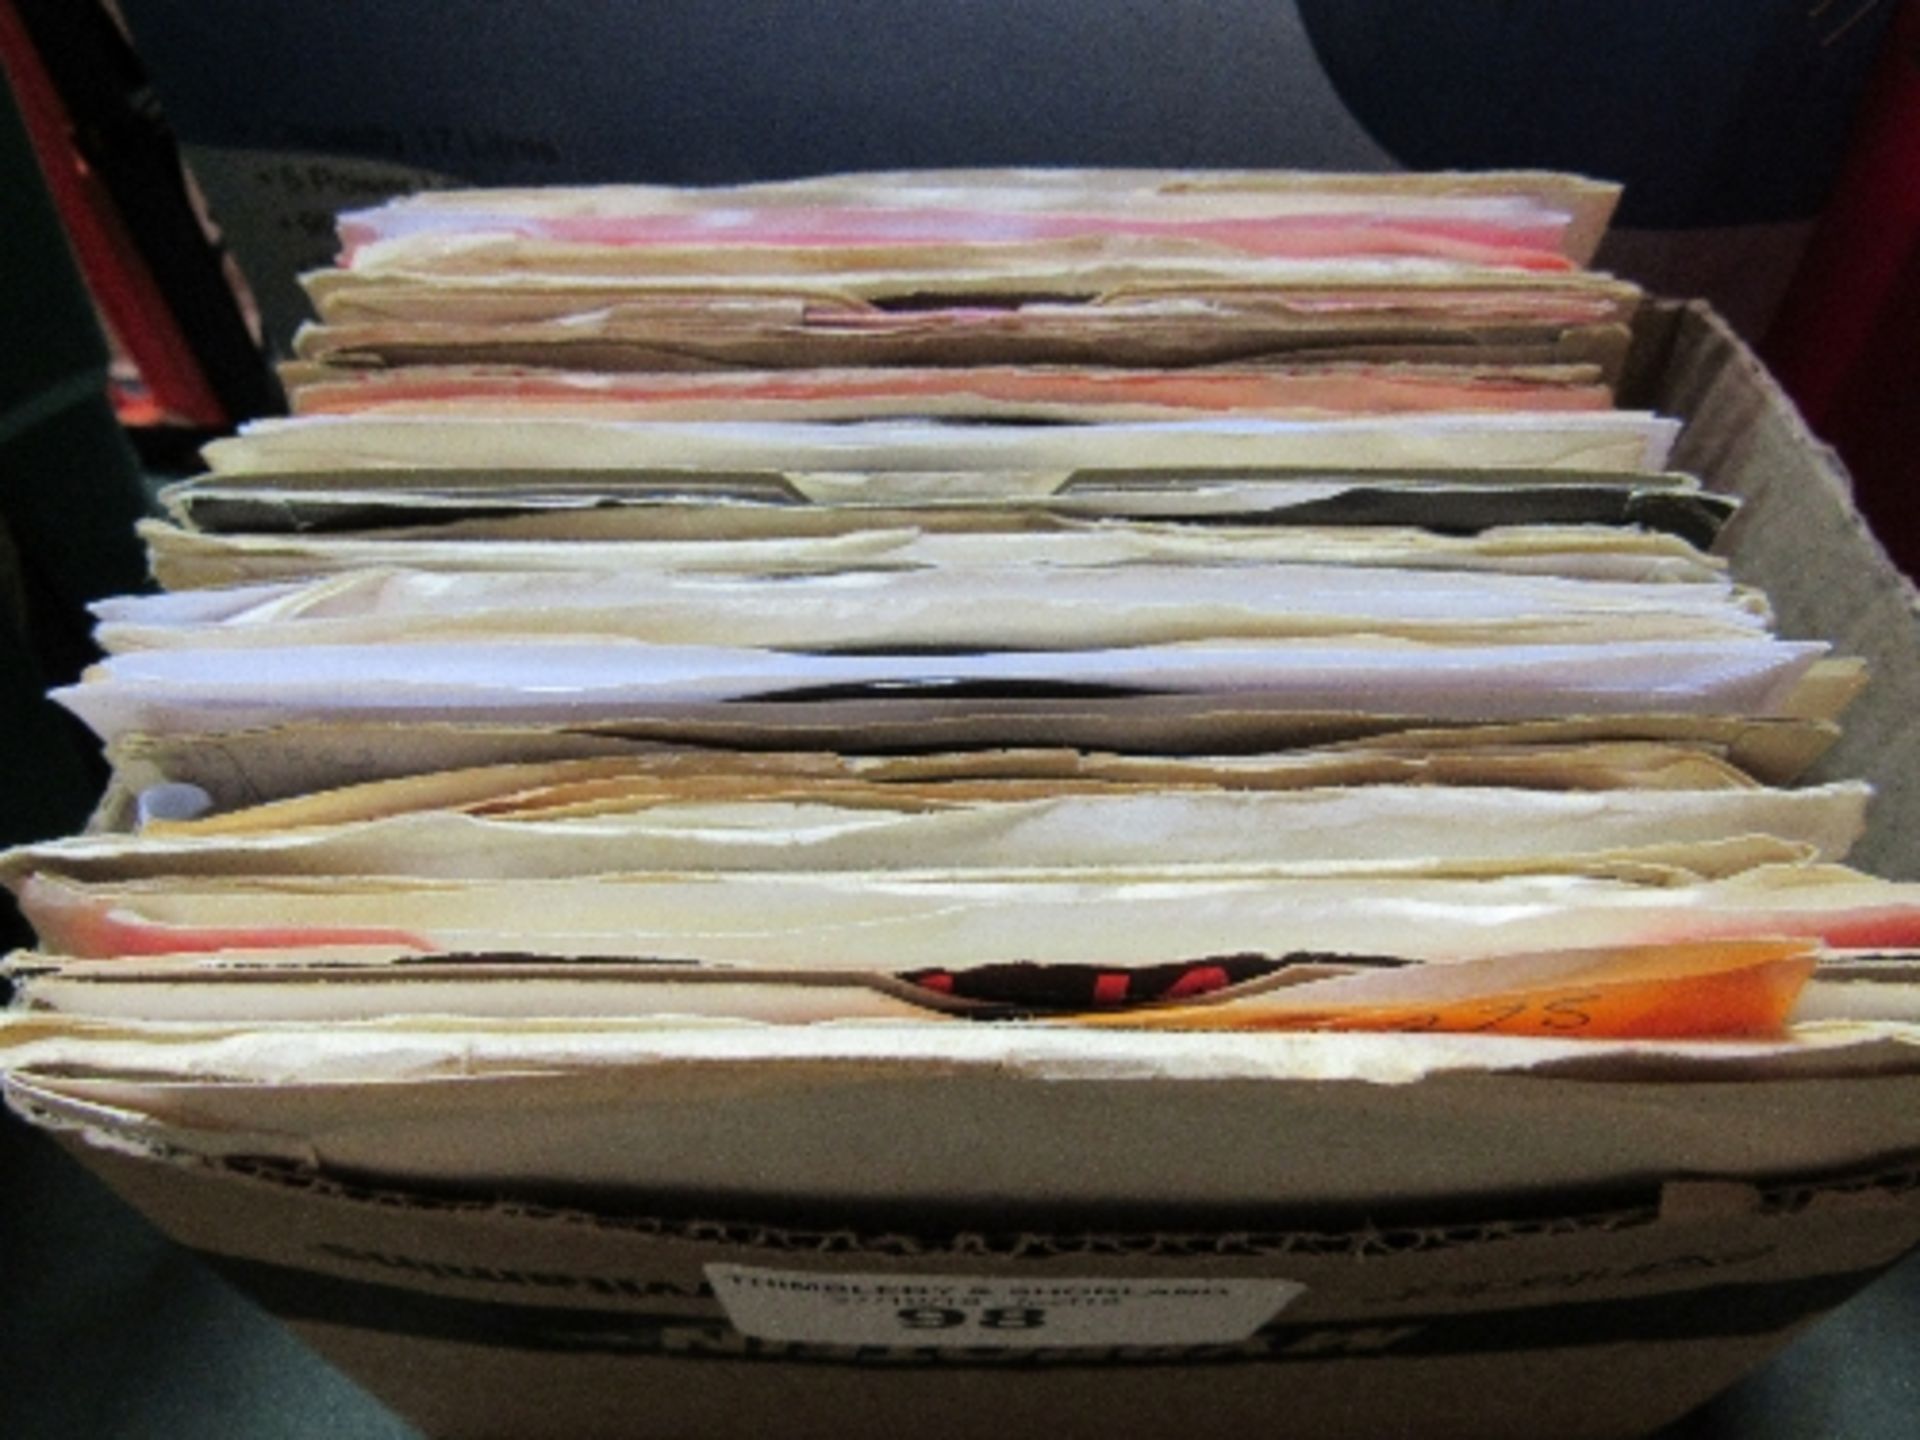 Approx 60 funk & soul singles, 50's/60's. Price guide £50-60.